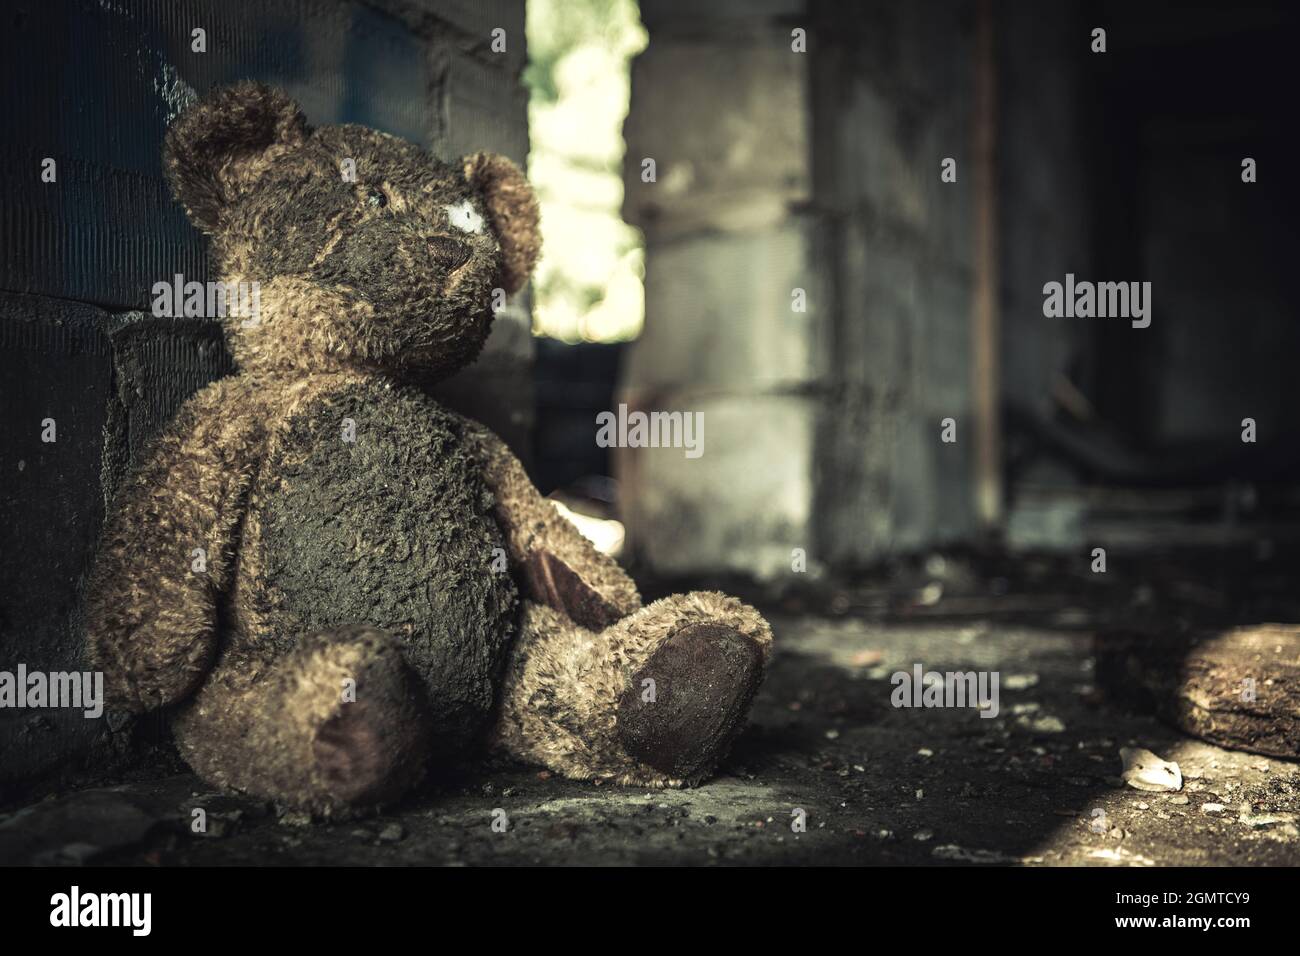 Domestic Violence or Abuse Theme with Dirty Teddy Bear Inside House Ruins. Stock Photo